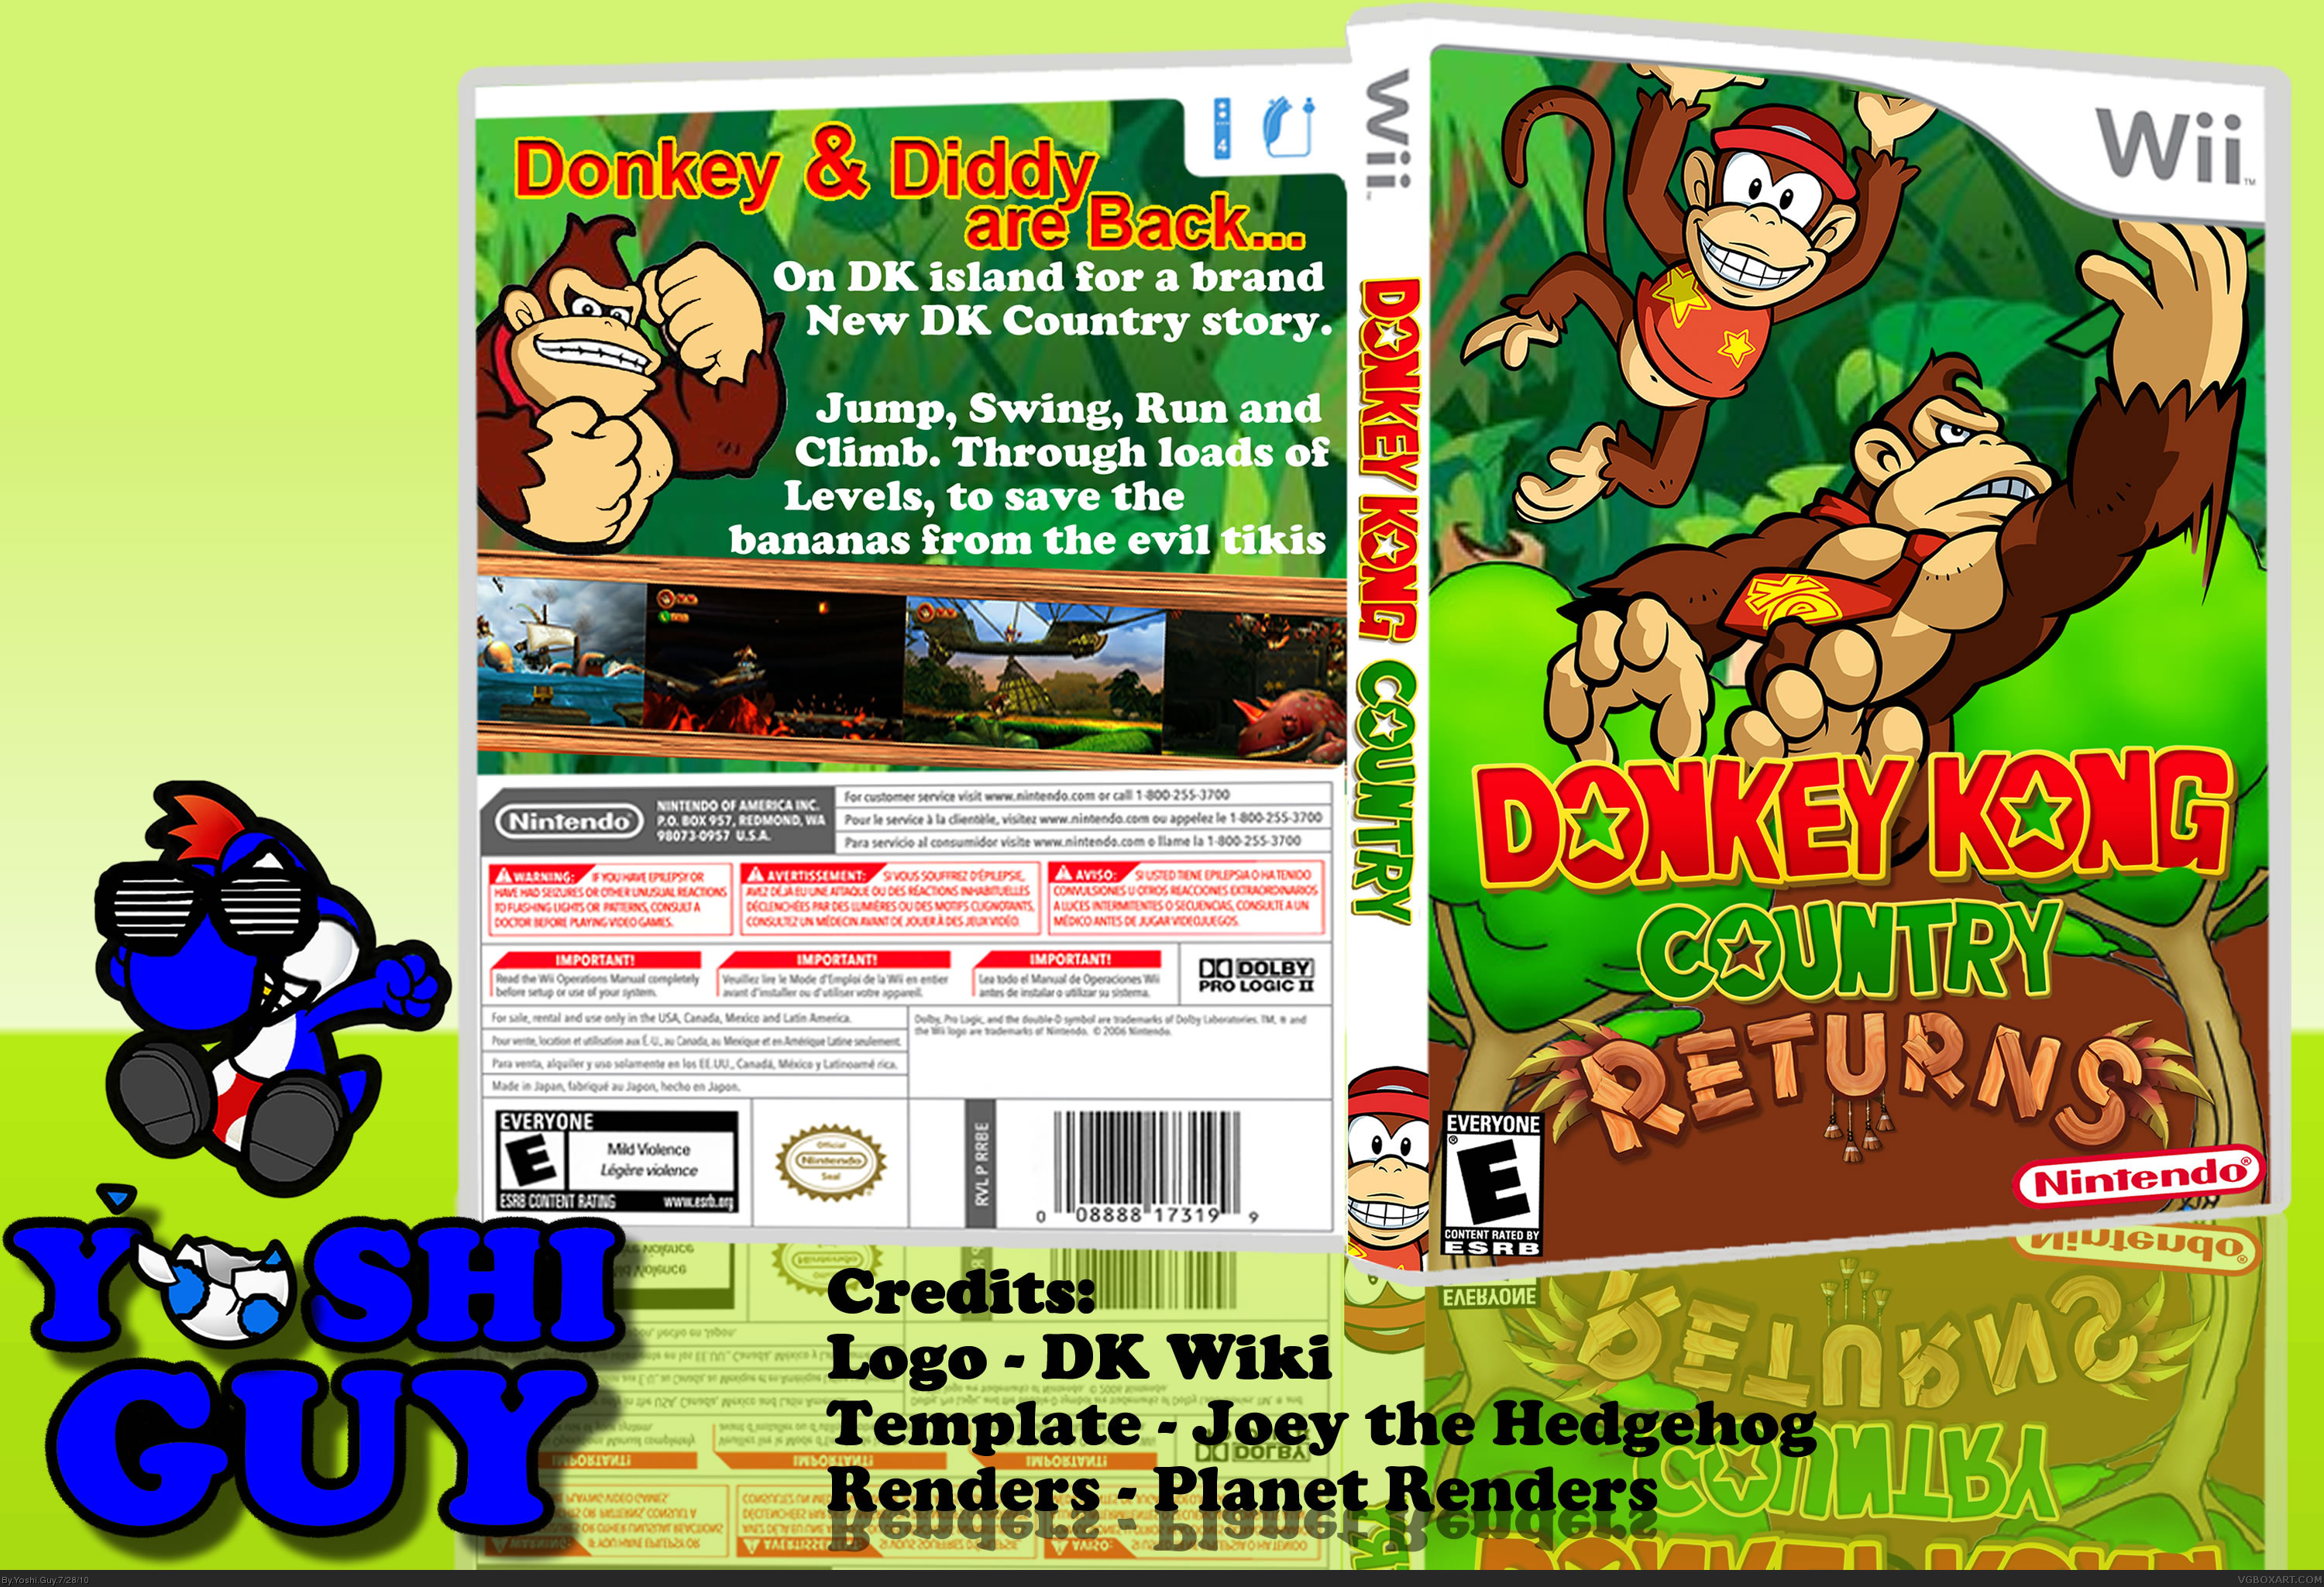 map button to roll donkey kong country returns